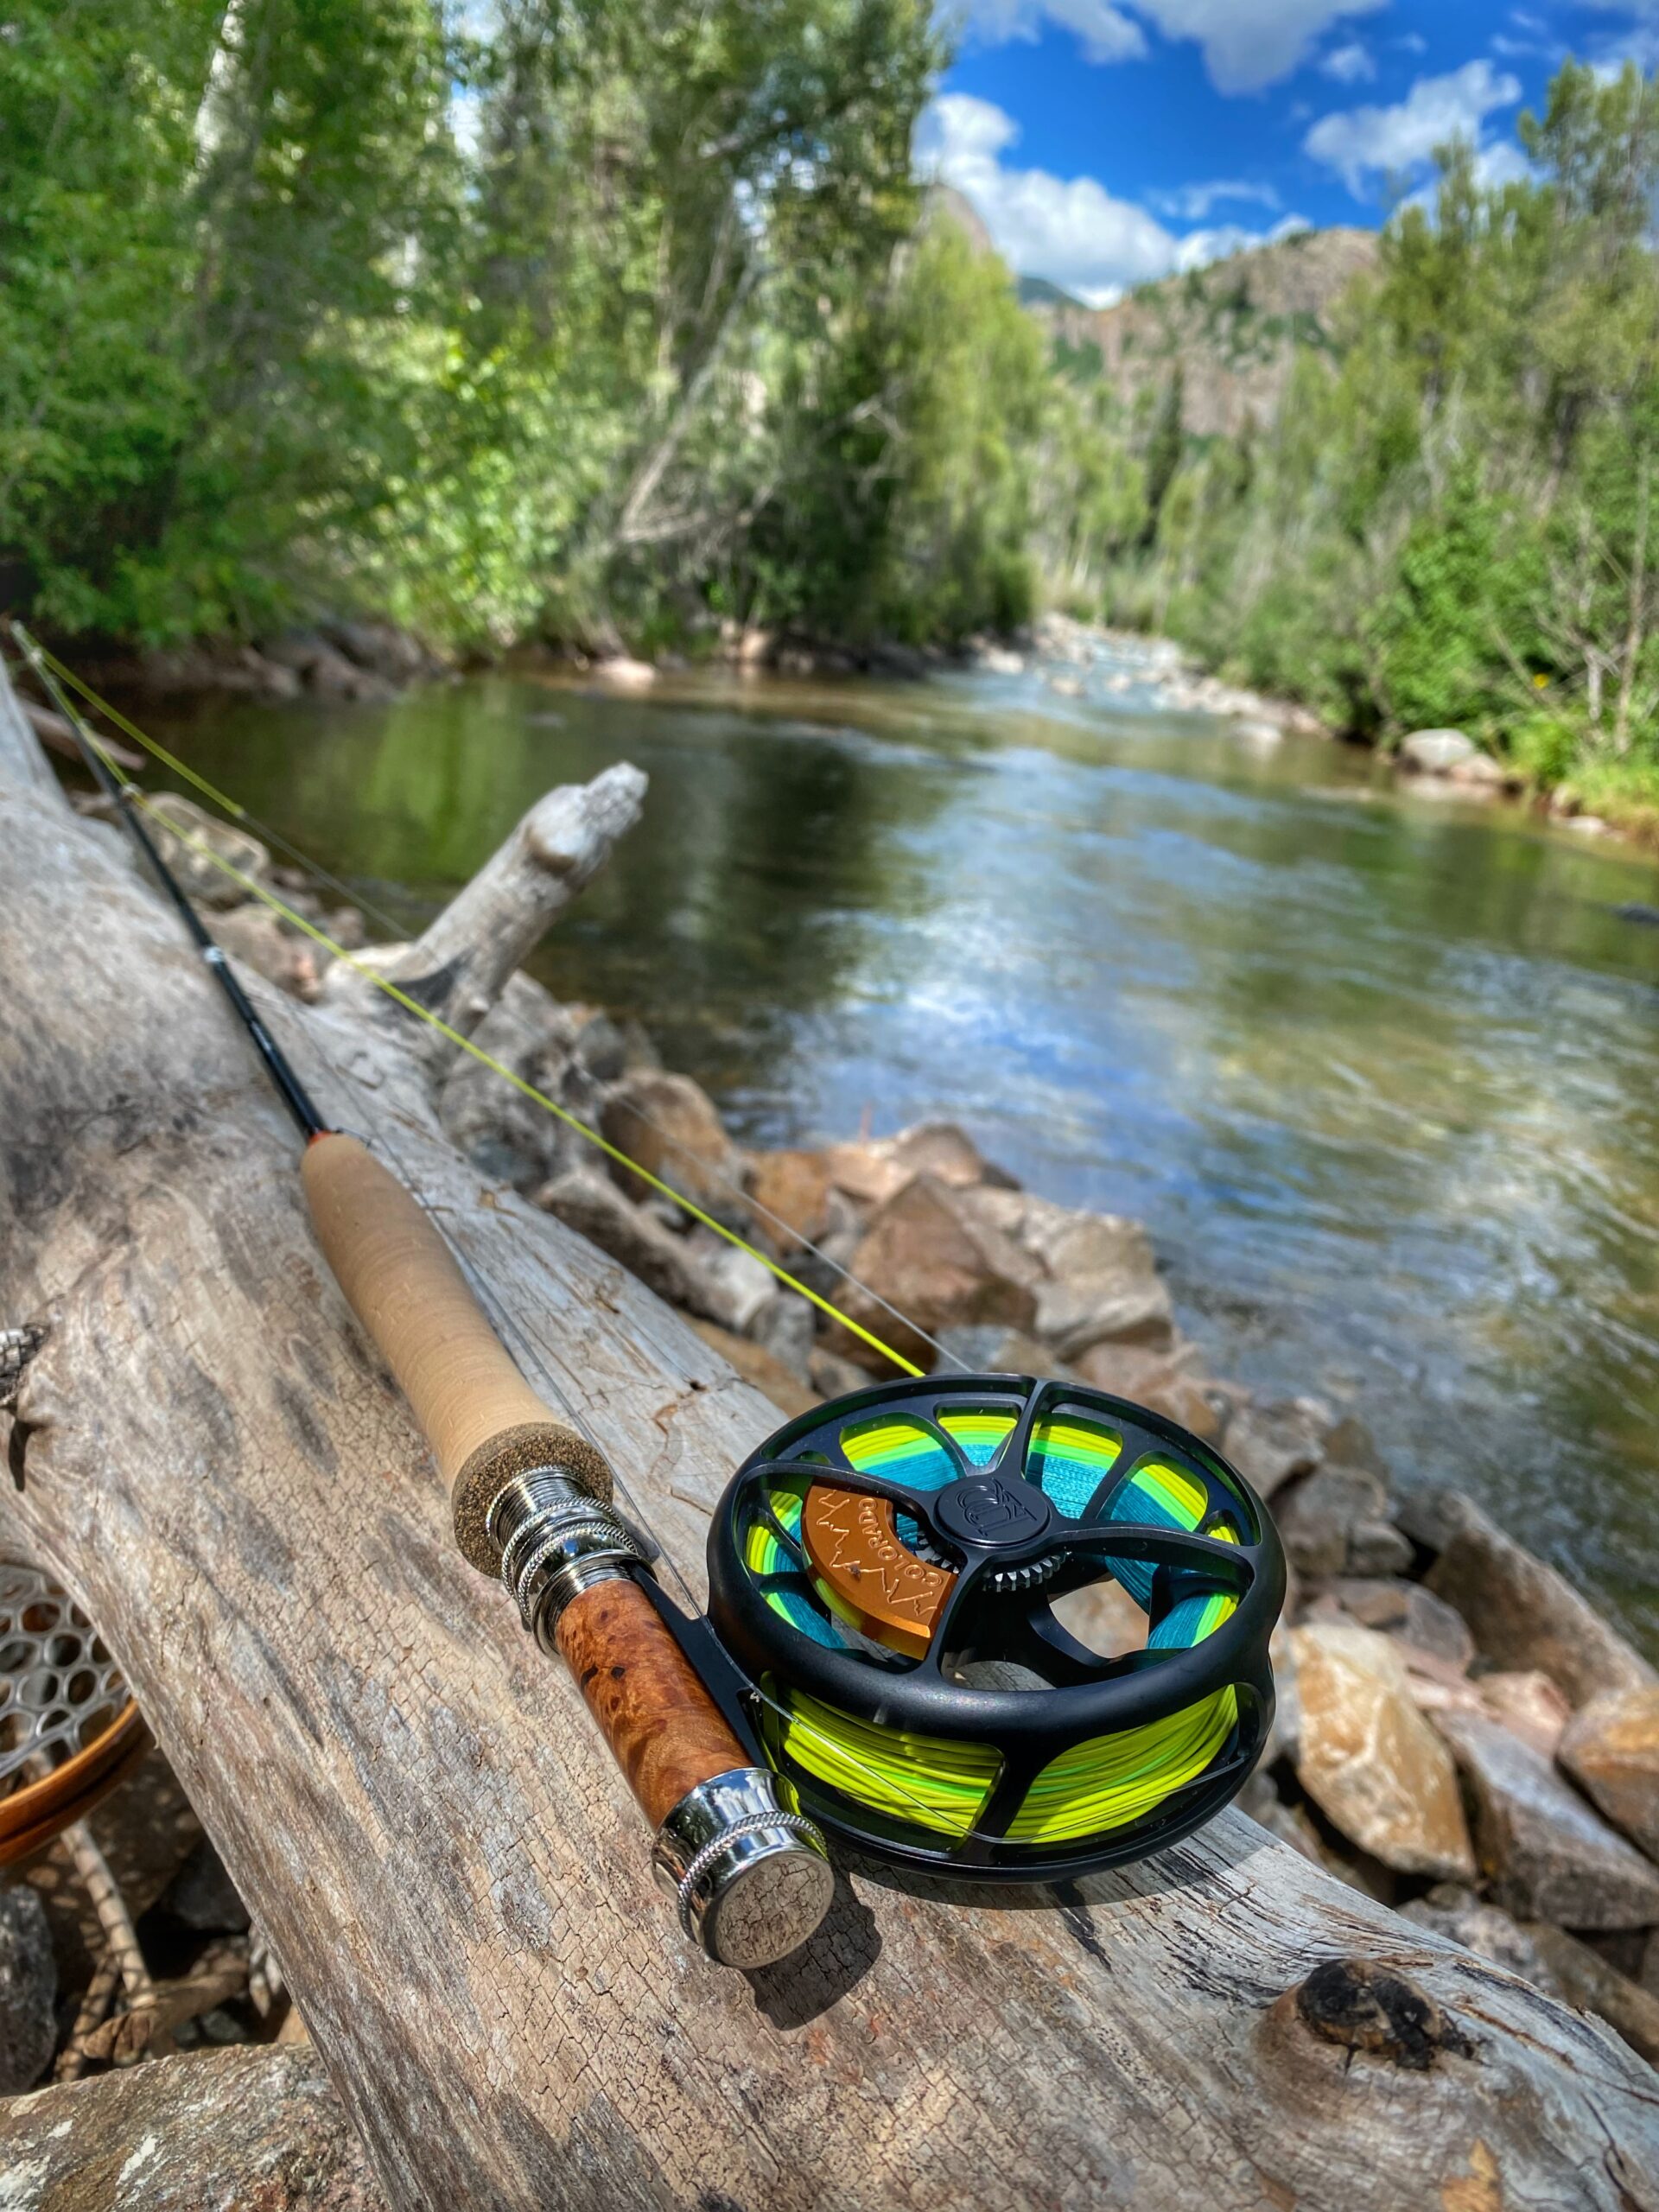 What length and line weight should I buy for my first fly rod? - fisherofzen